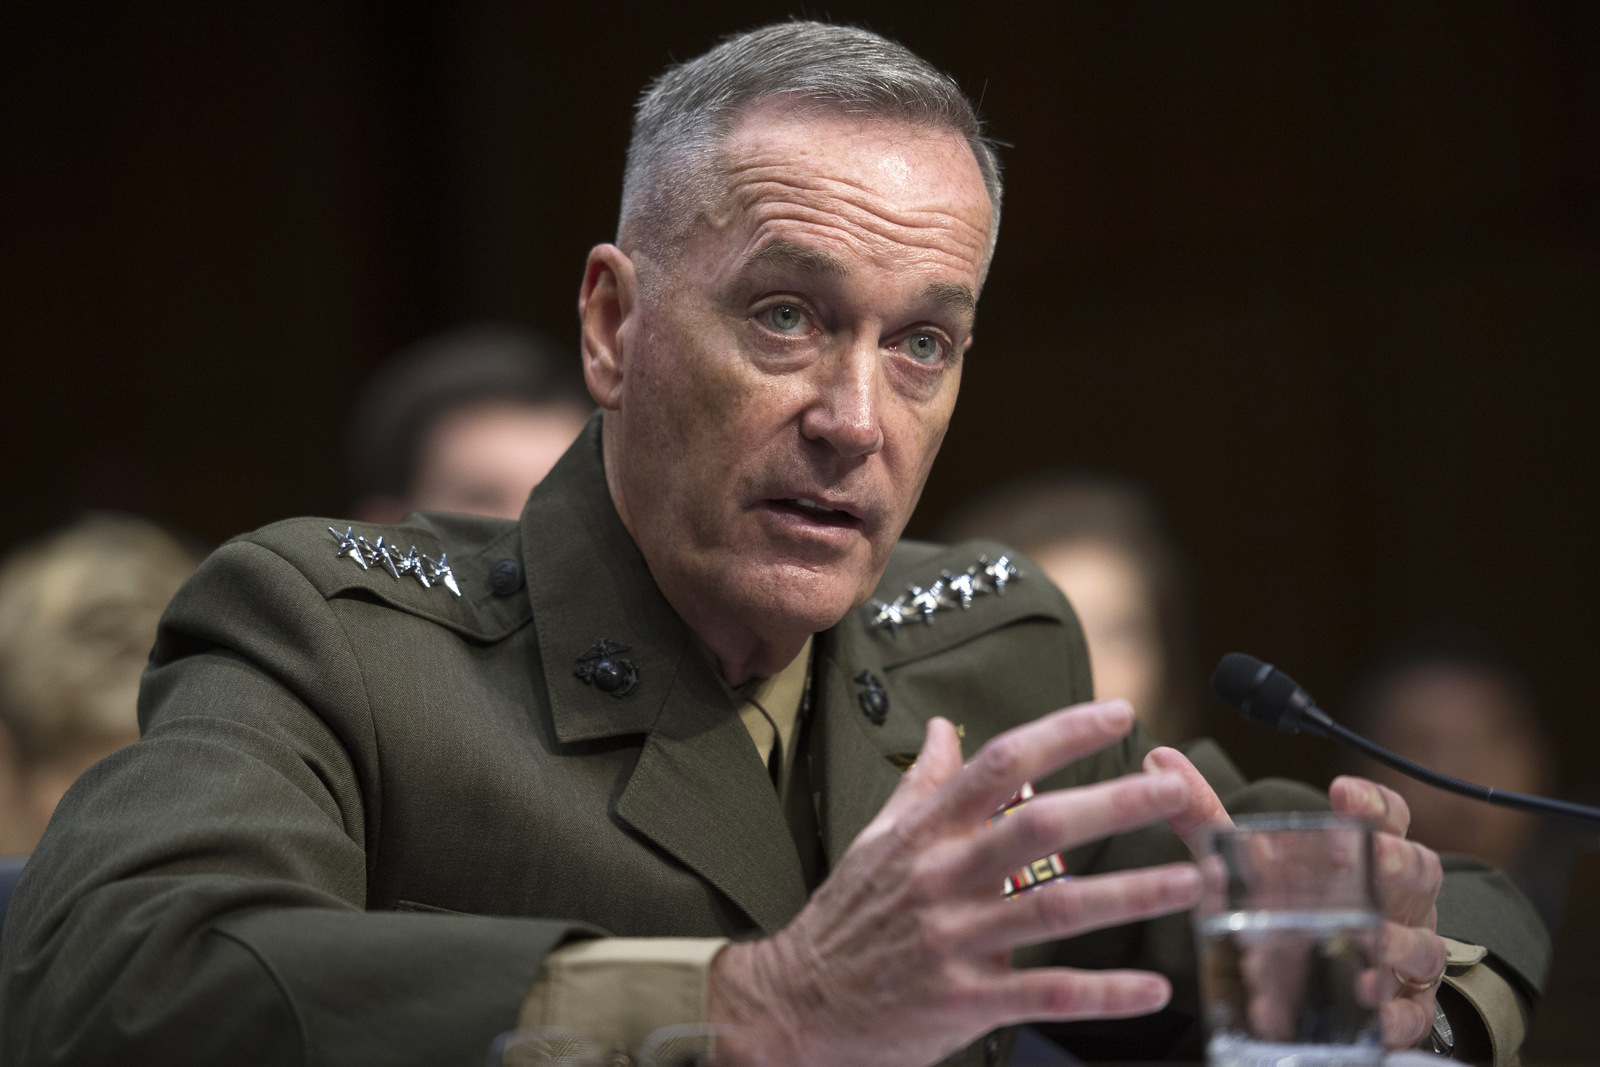 The chairman of the Joint Chiefs of Staff Gen. Joe Dunford has pushing for counter-ISIS offensive in Libya, now it's looks Obama may be taking Dunford's recommendations seriously. (AP Photo)